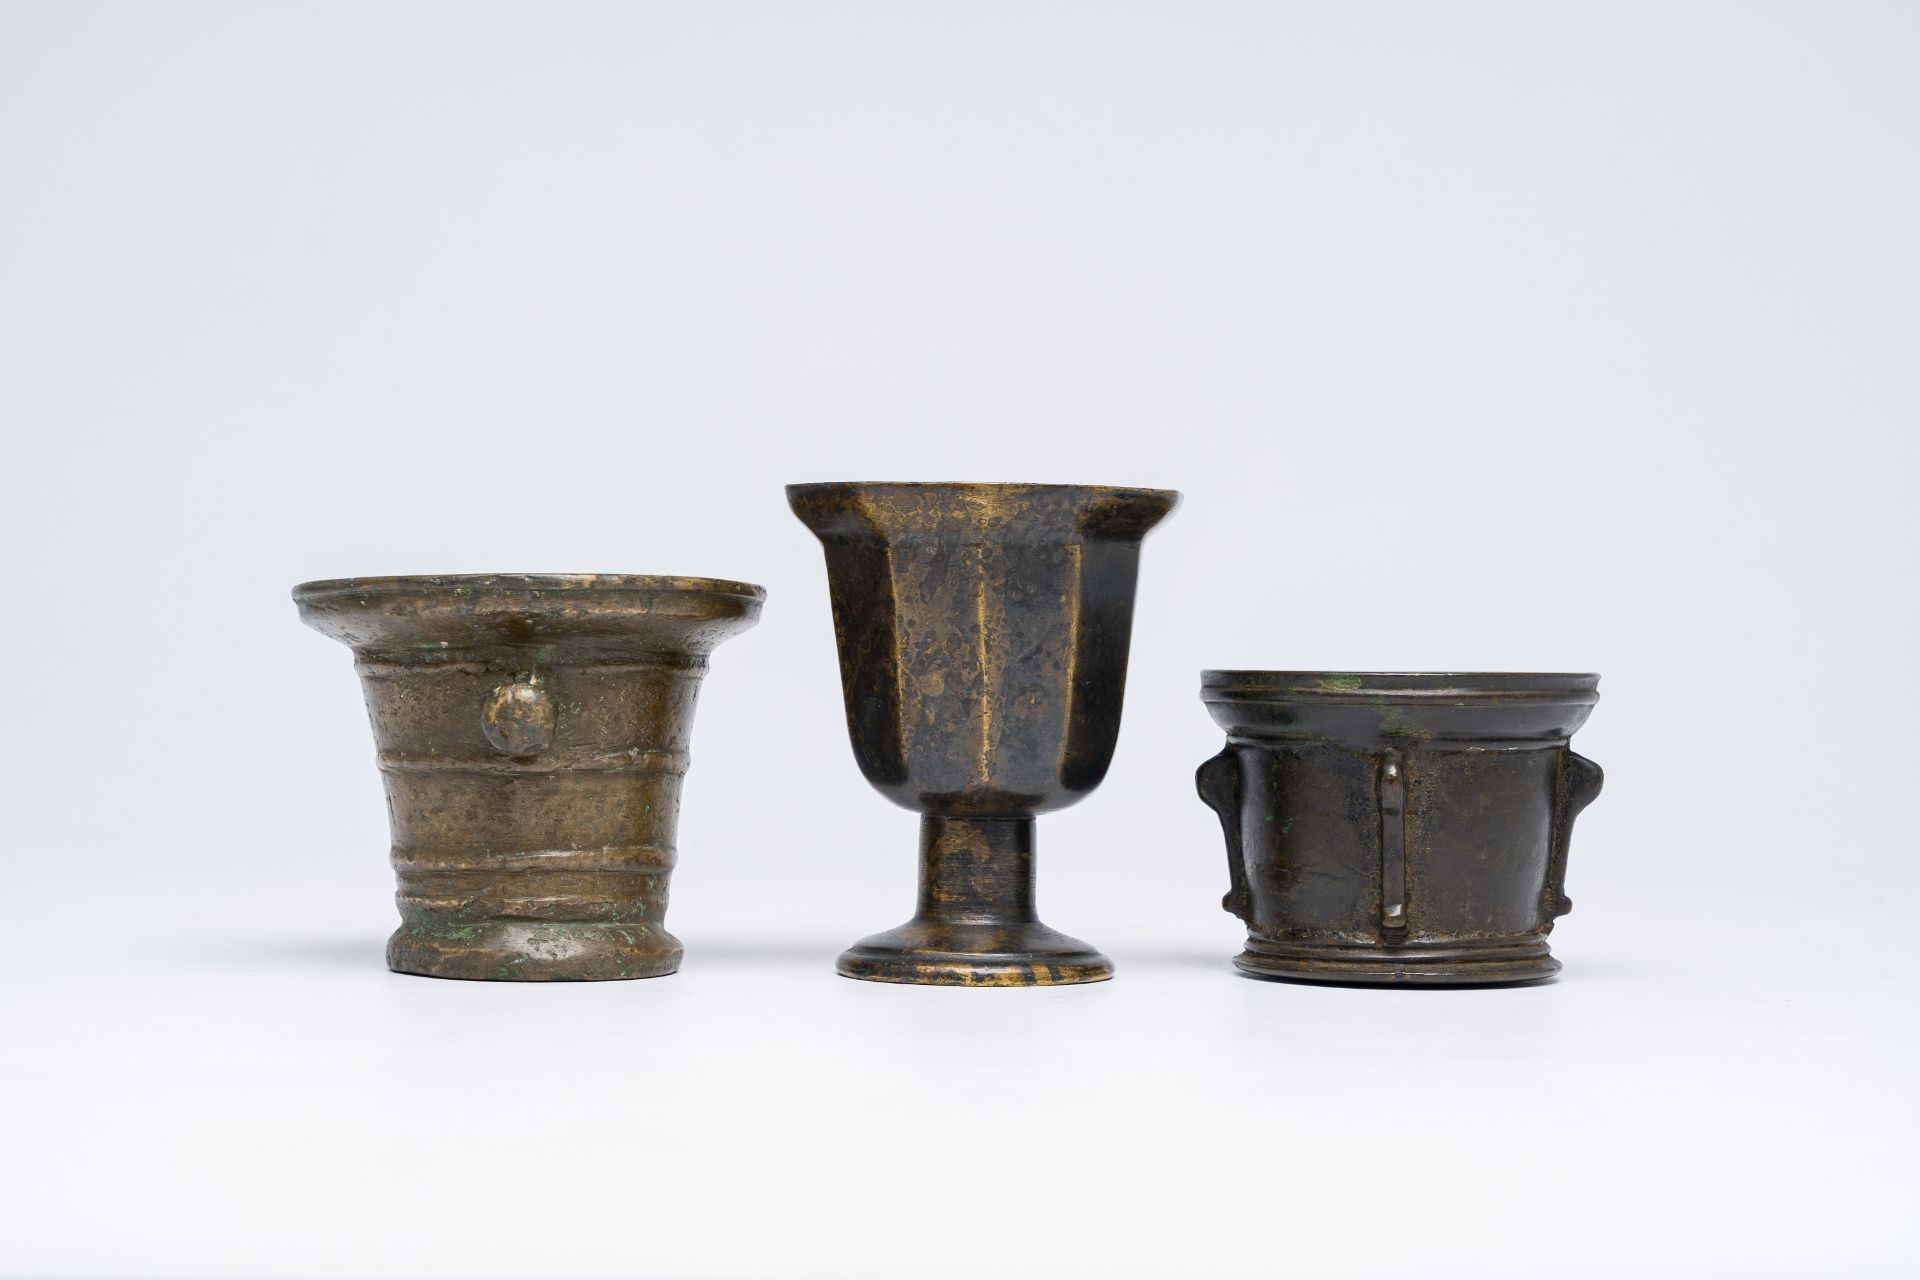 Two bronze mortars and a footed goblet, France and/or Italy, 16th C. - Image 3 of 7